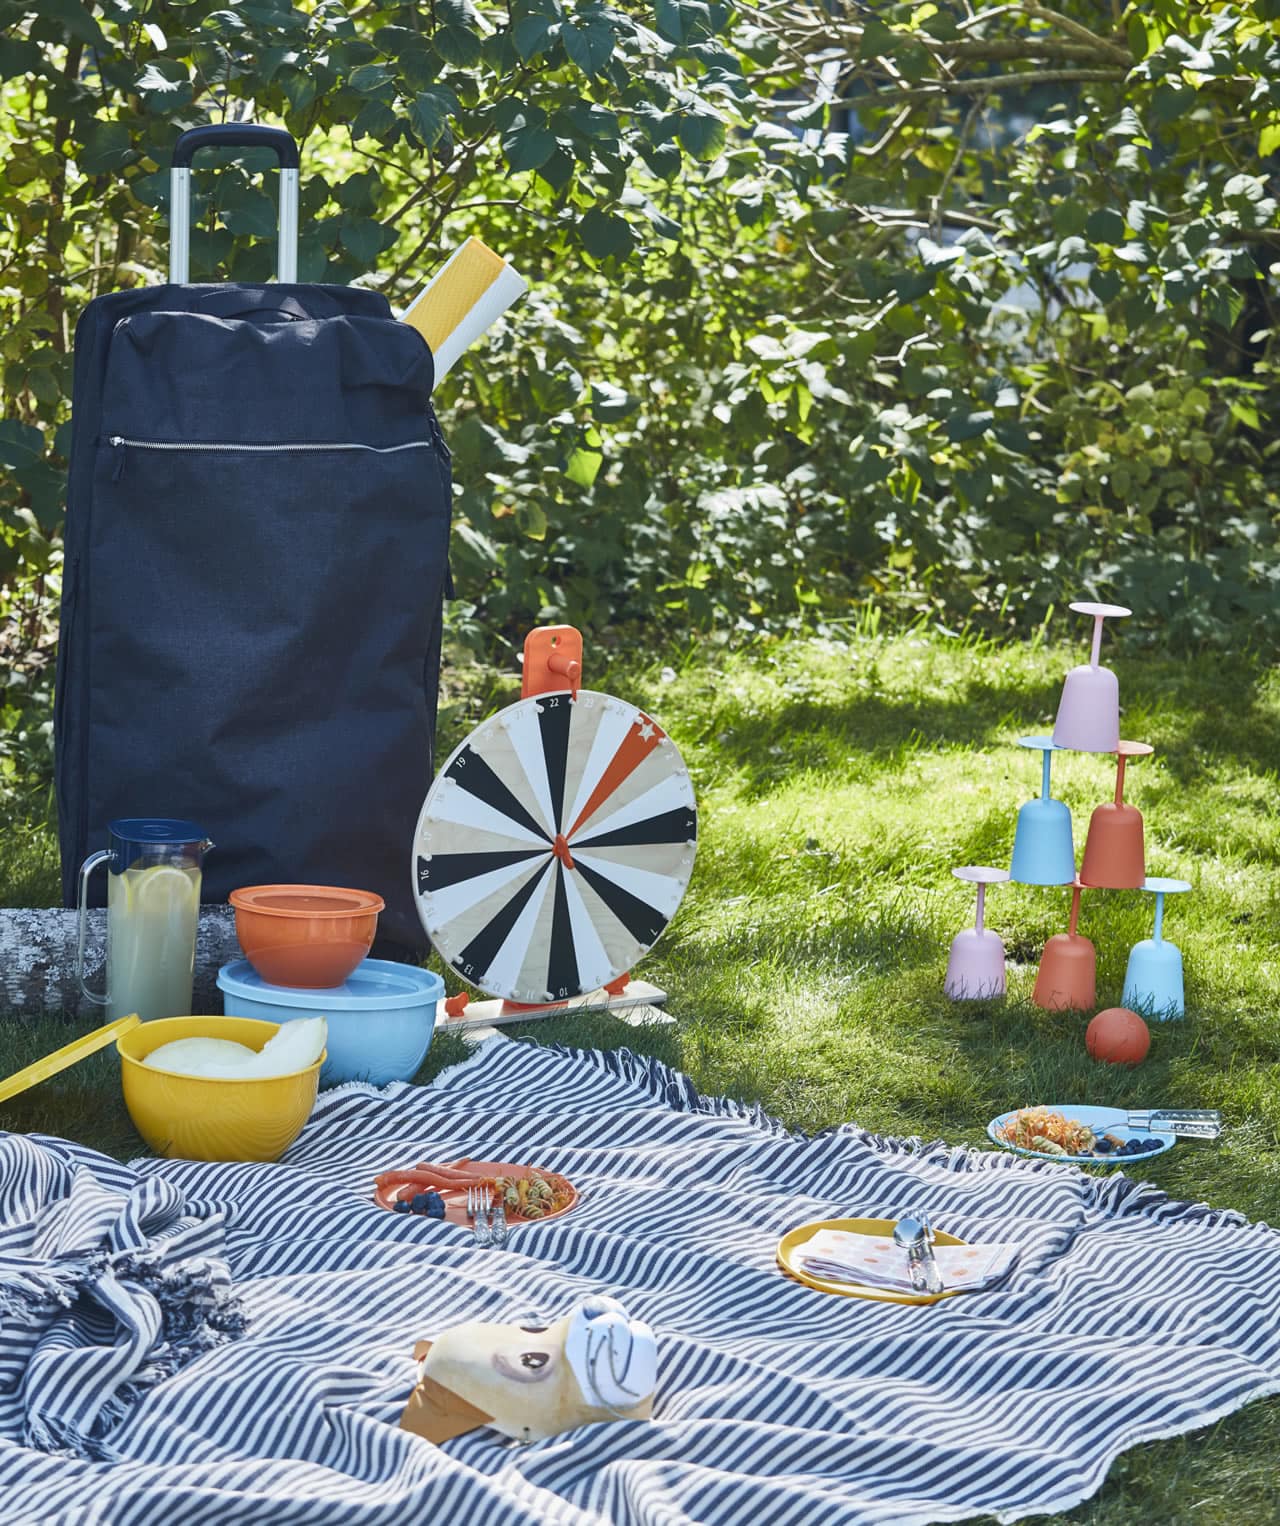 IKEA Ideas - It’s spring and you can picnic again